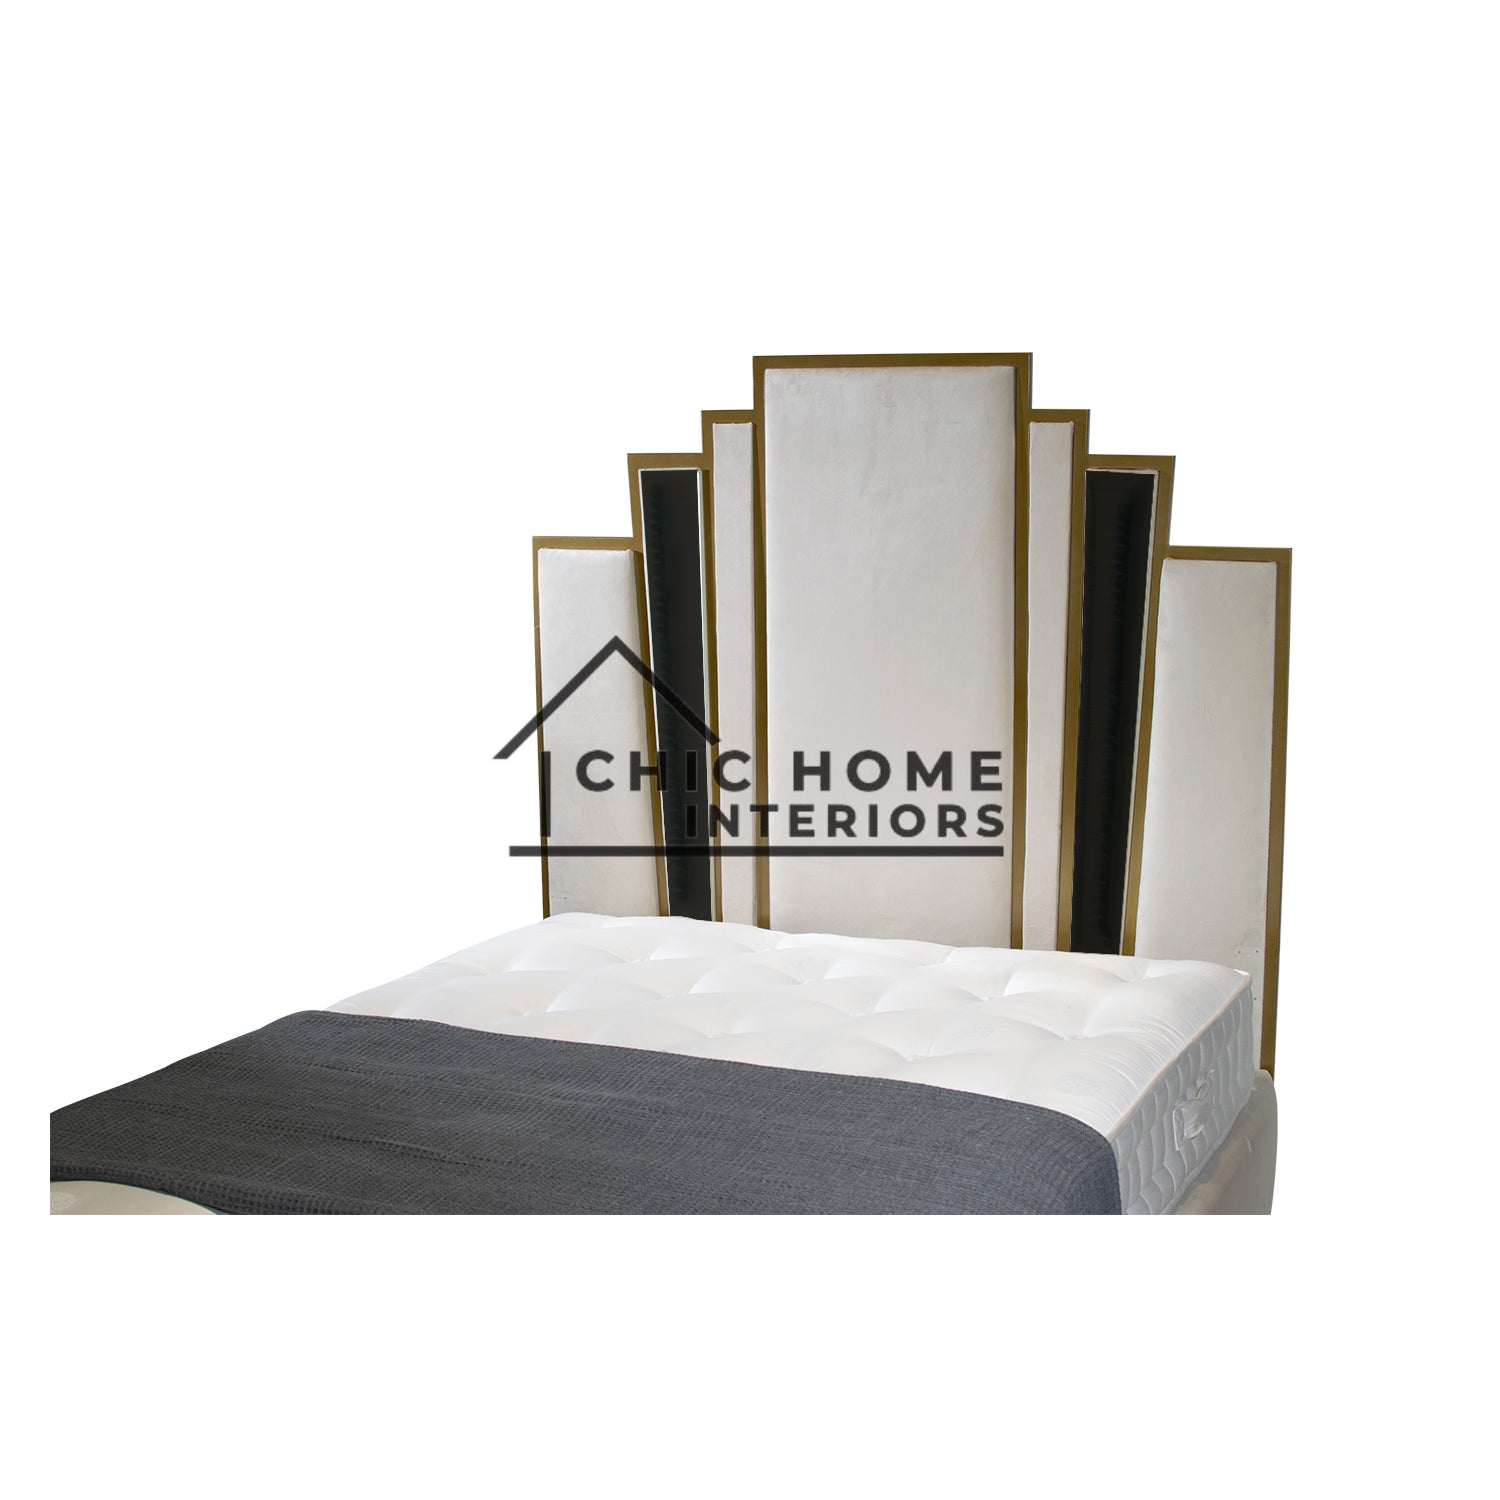 The Bespoke Mary-Kate Bed Gold Mirrored- Fully Customisable with Storage Options- Luxe Metal Range